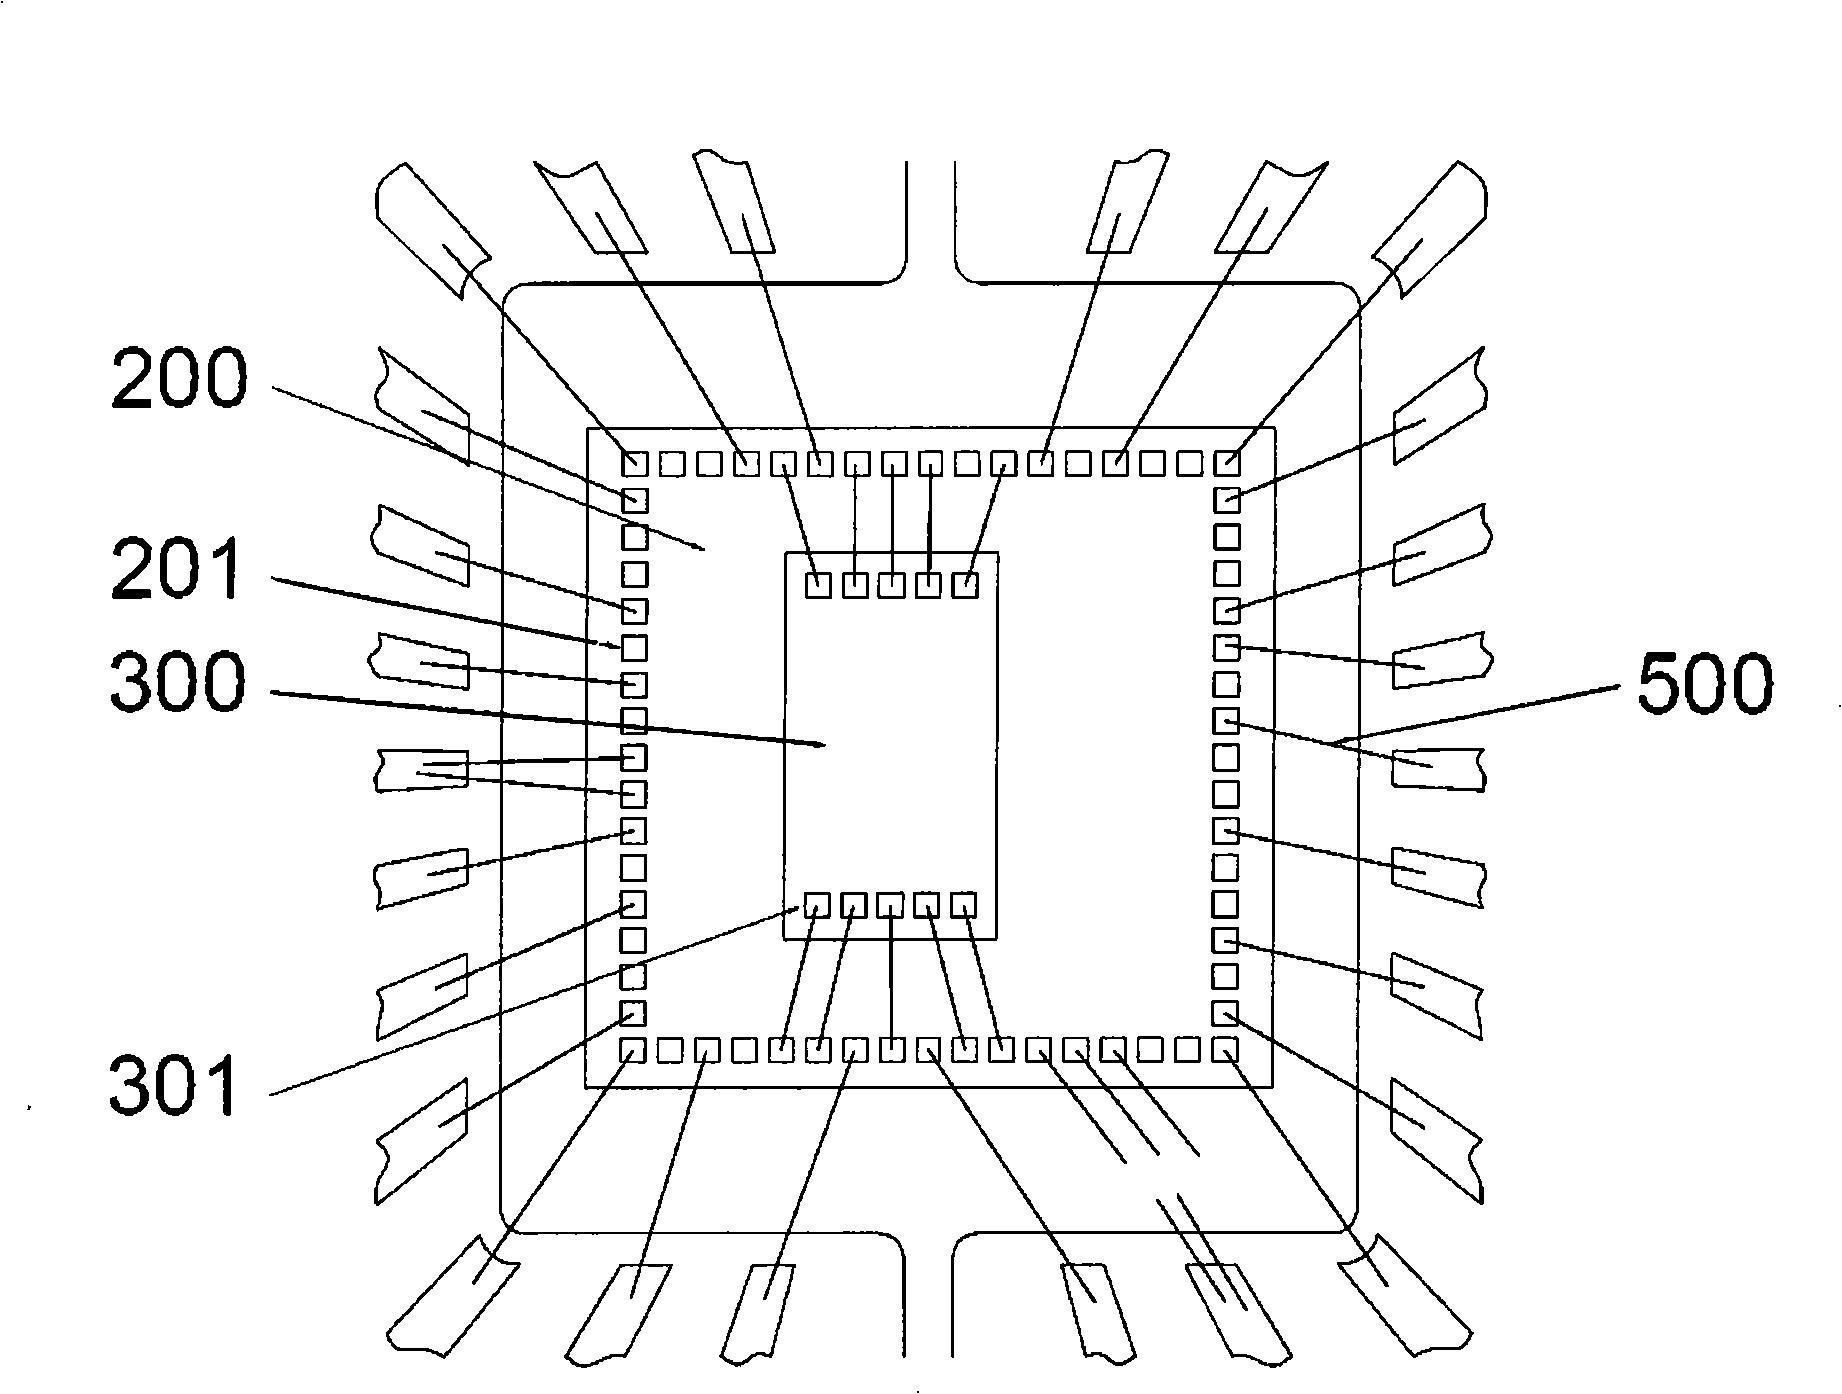 Multi-chip 3D stacking and packaging structure